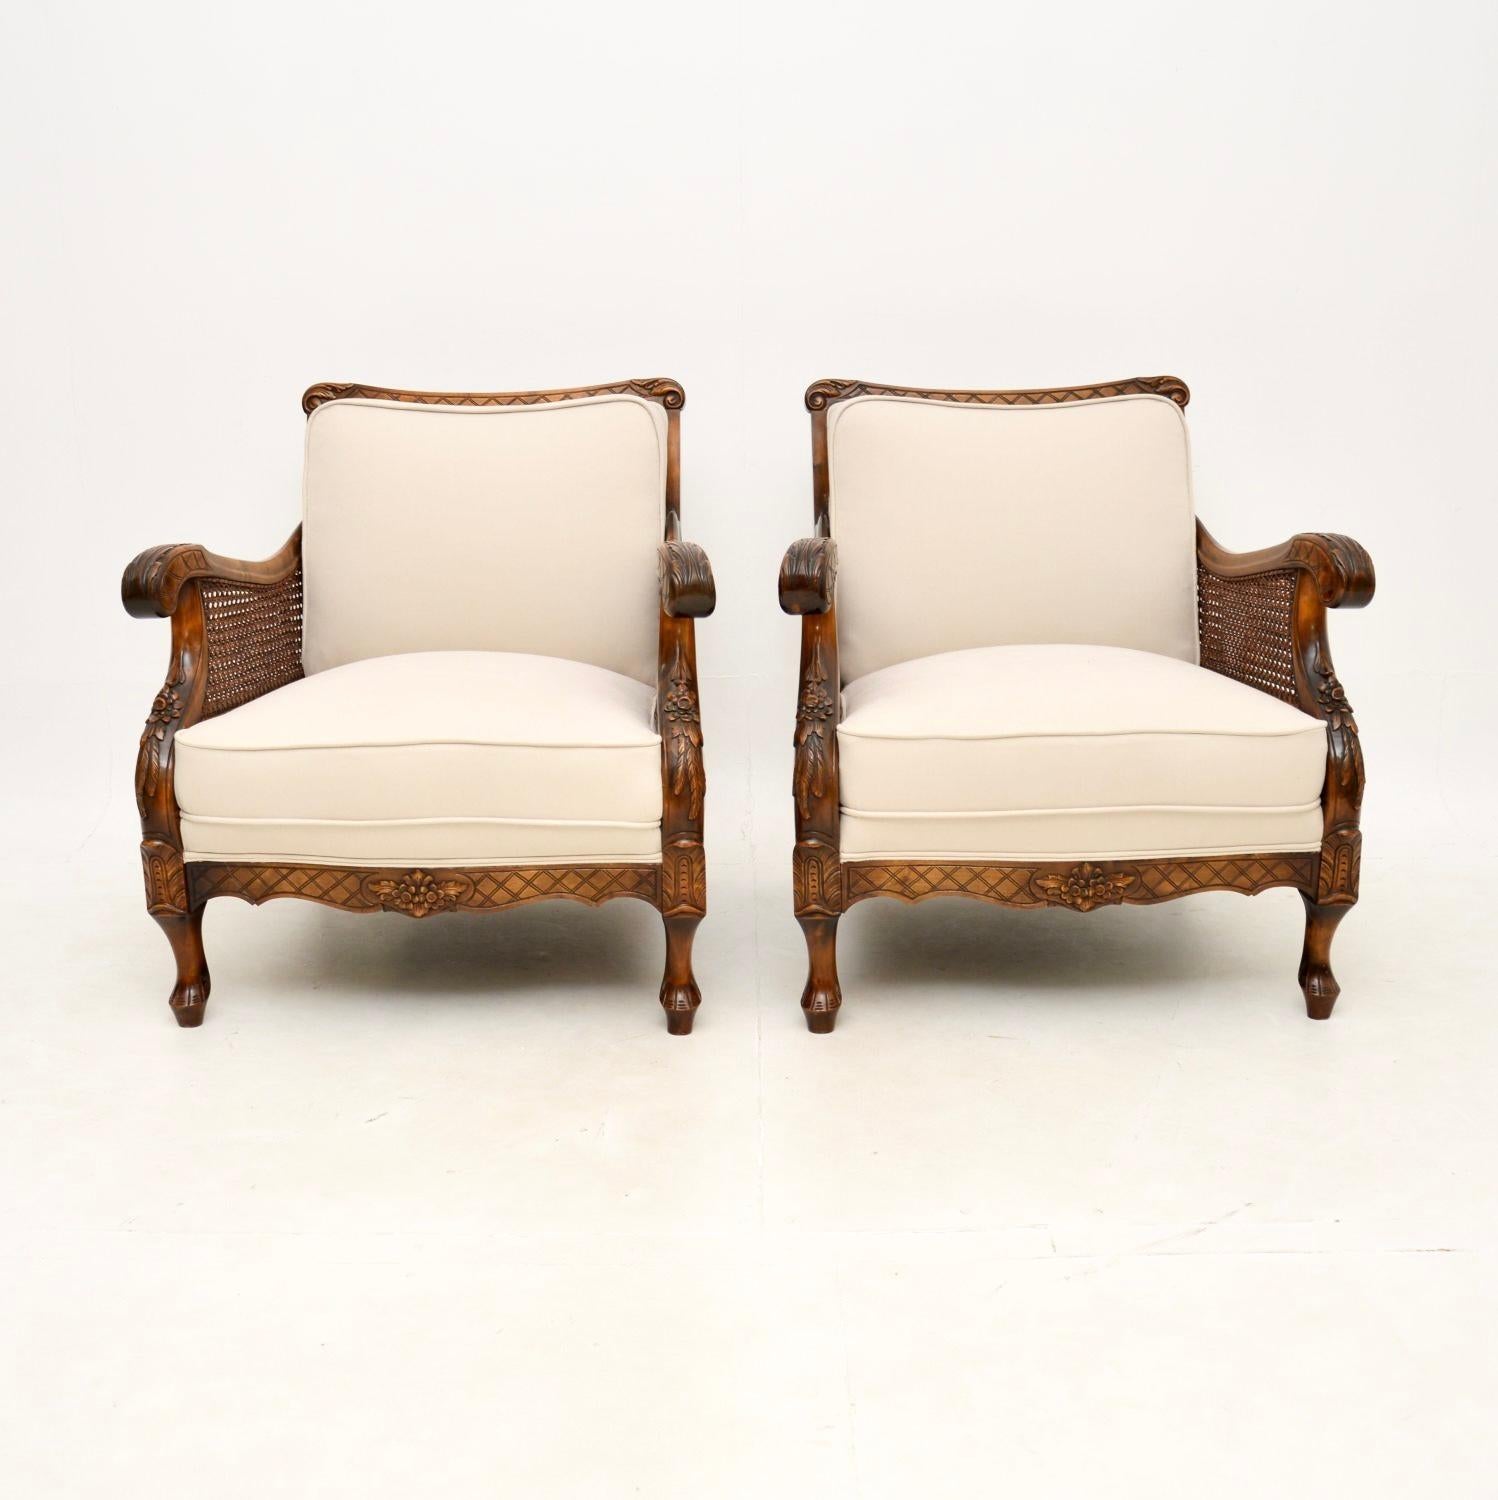 A stunning pair of antique Swedish satin birch bergere armchairs. They were recently imported from Sweden, they date from around the 1900-1910 period.

They are of incredibly fine quality, with beautifully crisp carving throughout. The sides panels